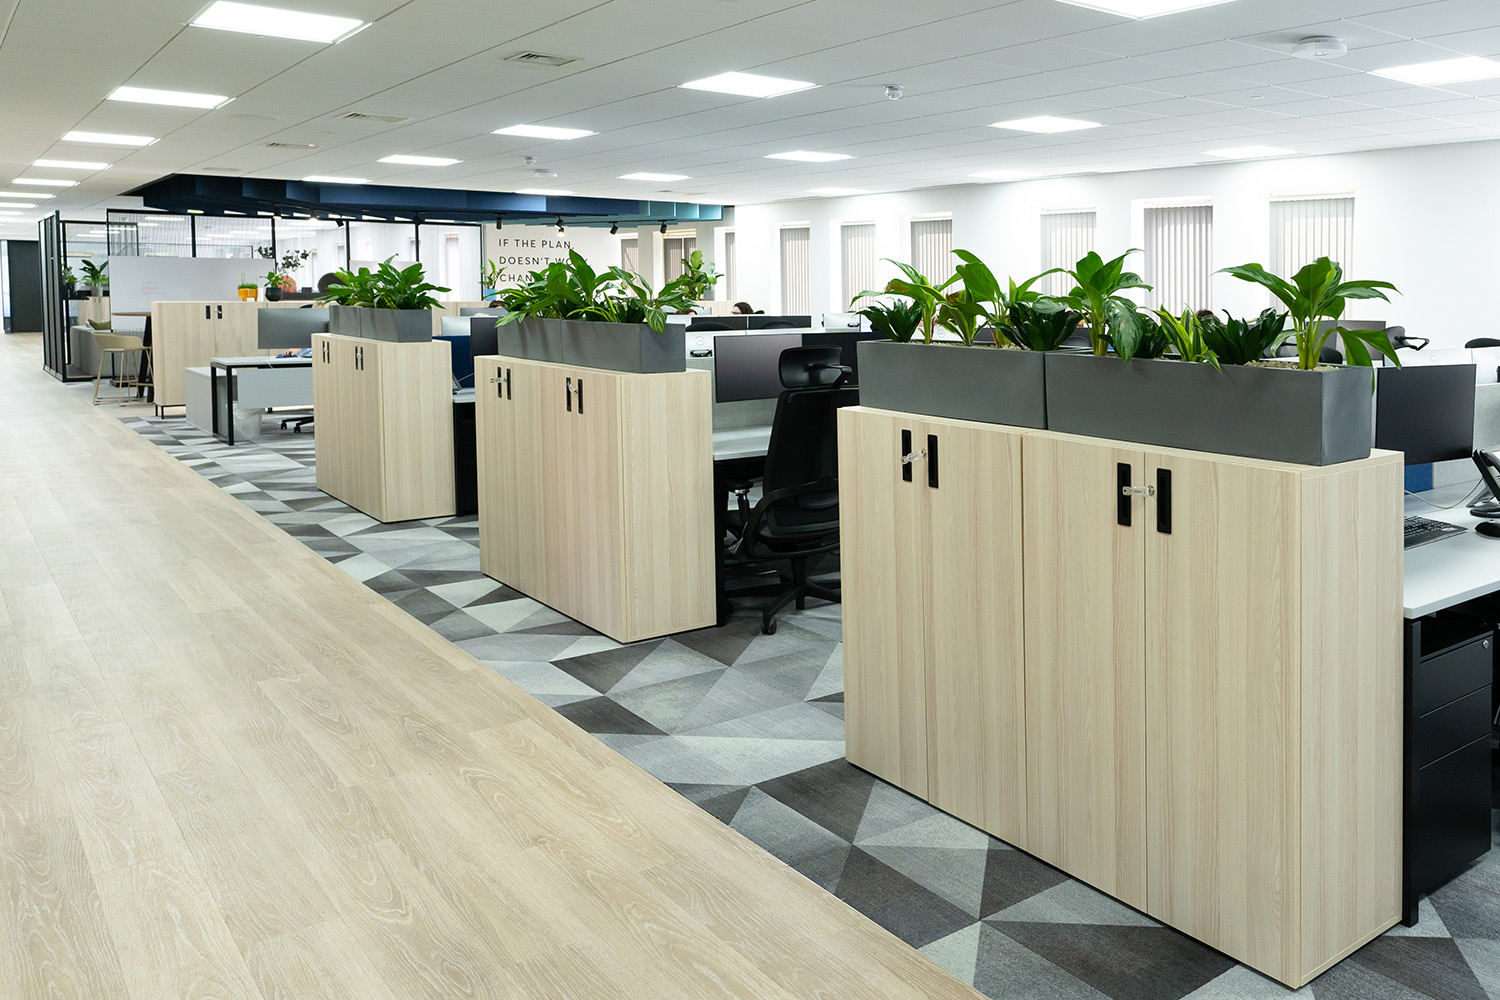 Associa Office Fit-Out Spacio